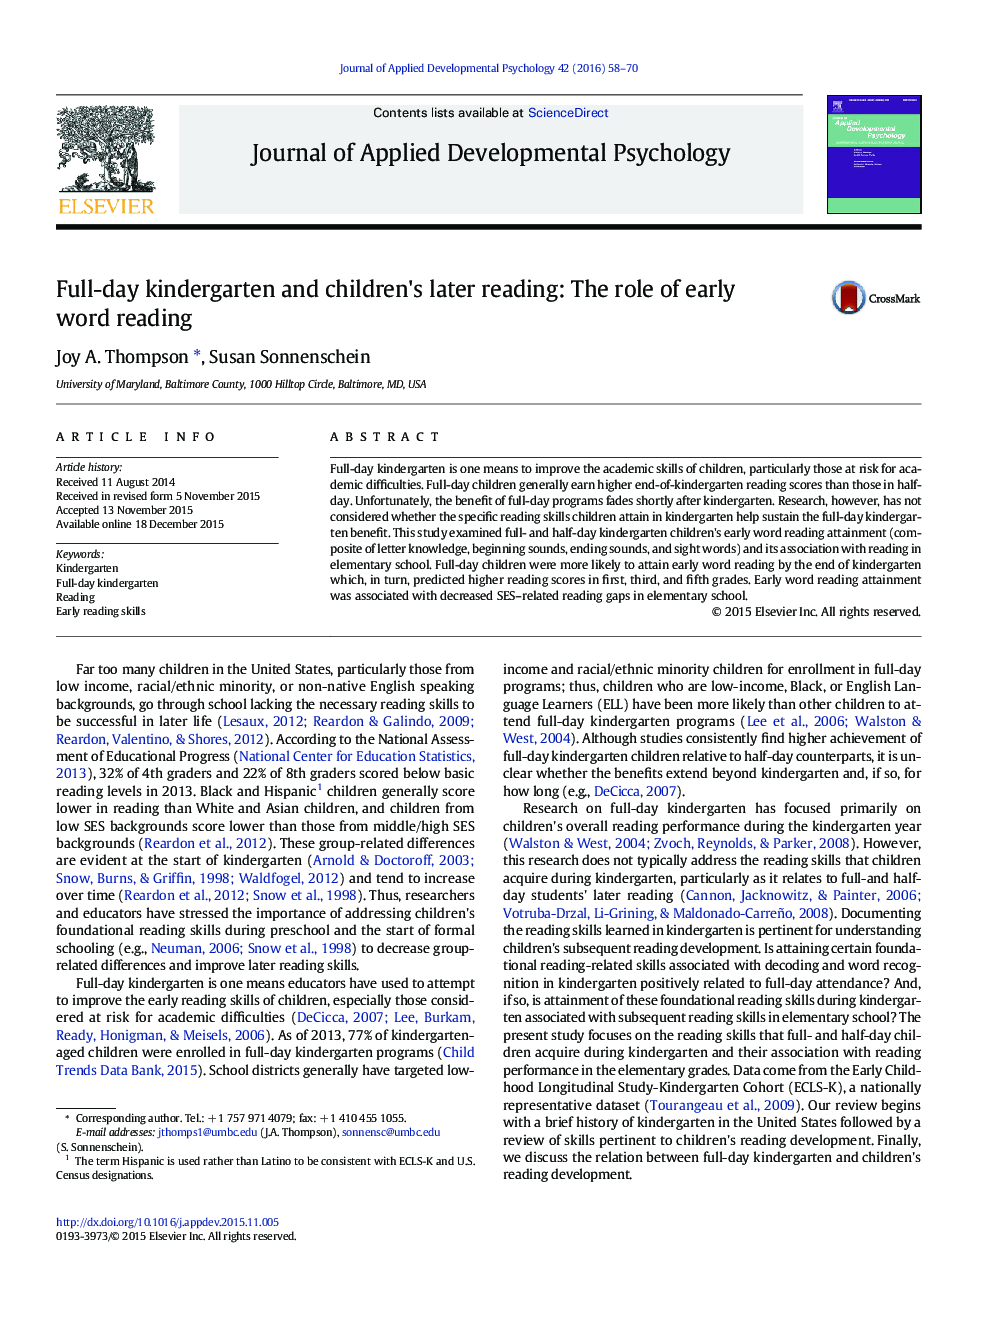 Full-day kindergarten and children's later reading: The role of early word reading